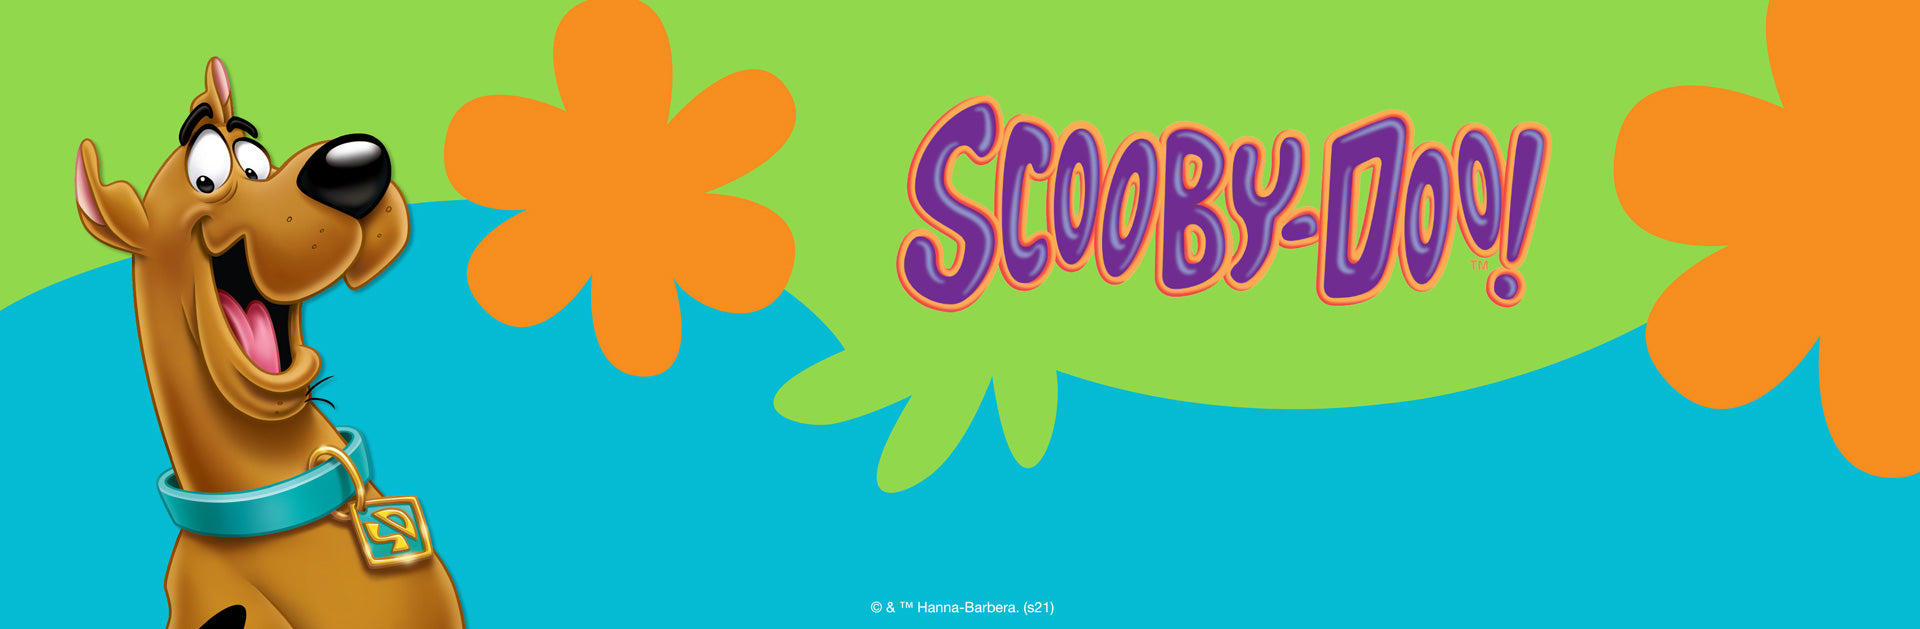 Scooby-Doo Collection Banners